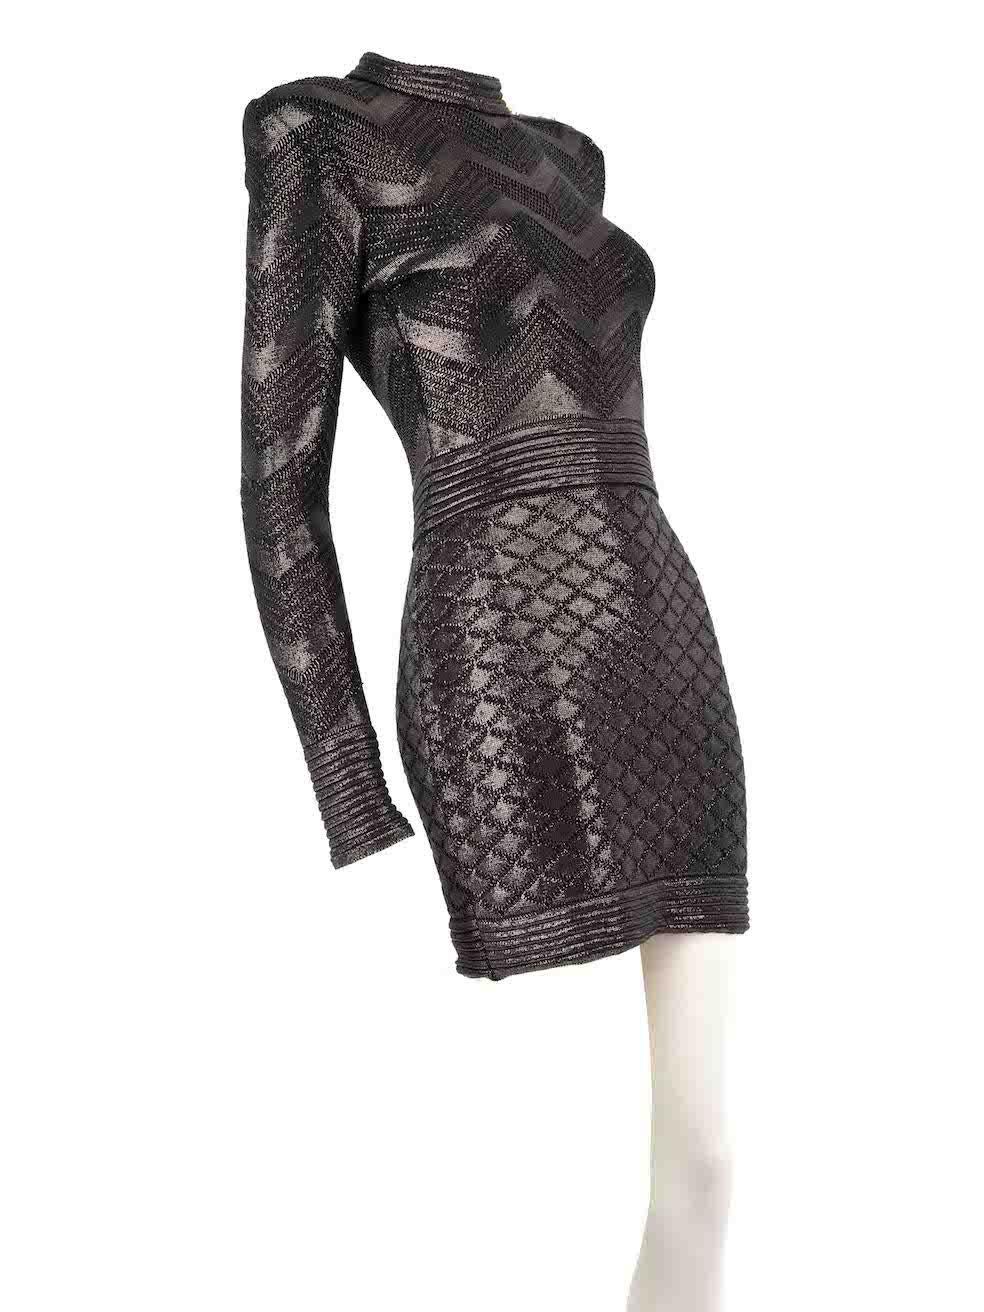 CONDITION is Very good. Minimal wear to dress is evident. Minimal pull thread is seen on both sides of shoulder and front chest area on this used Balmain designer resale item.
 
 
 
 Details
 
 
 Anthracite
 
 Cotton
 
 Long sleeves dress
 
 Mini